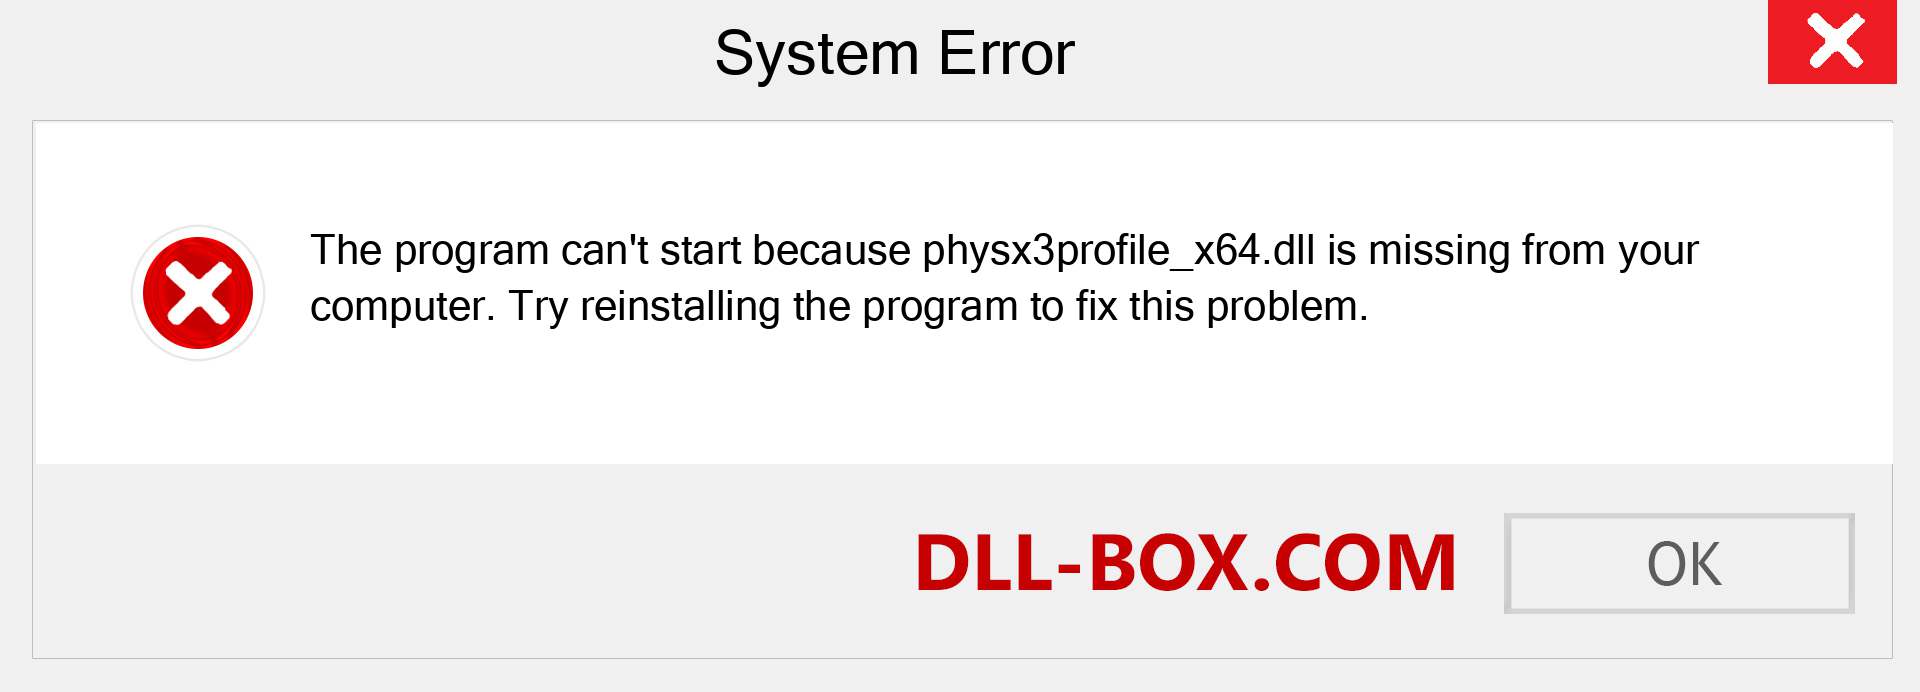  physx3profile_x64.dll file is missing?. Download for Windows 7, 8, 10 - Fix  physx3profile_x64 dll Missing Error on Windows, photos, images